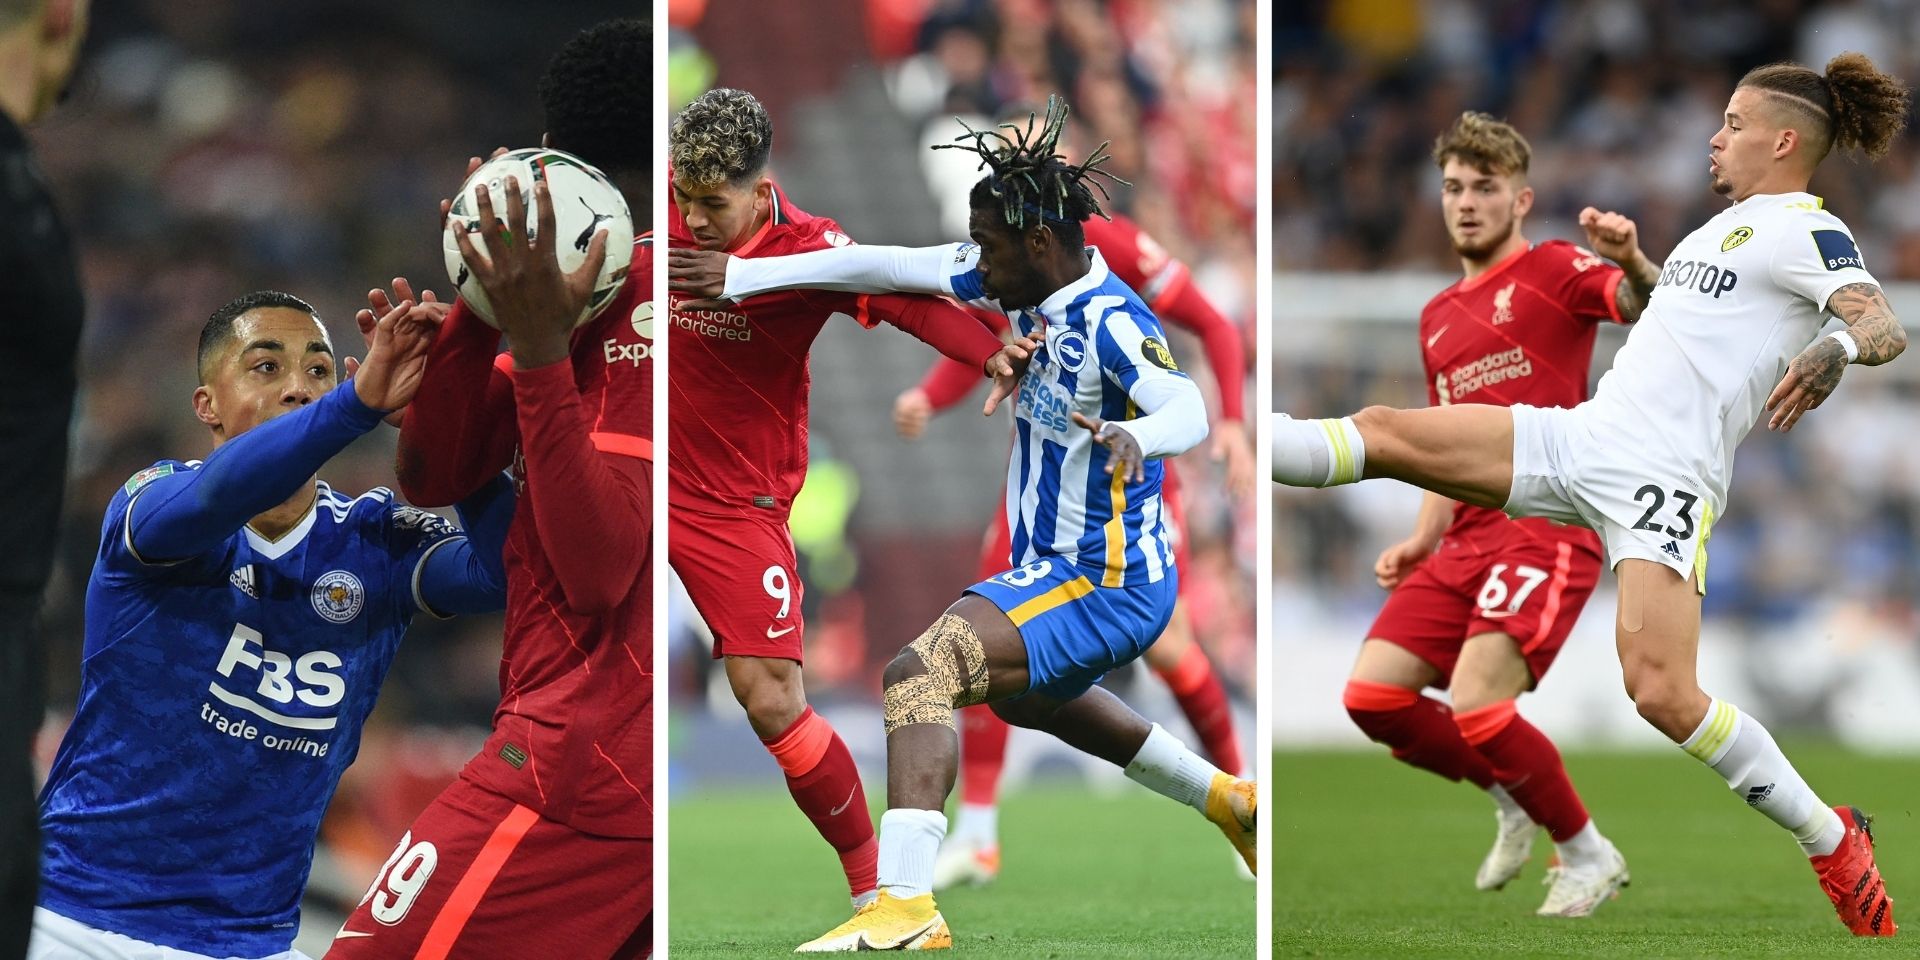 ‘There will be no stopgaps’ that Liverpool sign and we were more than ‘willing to pass on deals’ for midfielders this summer